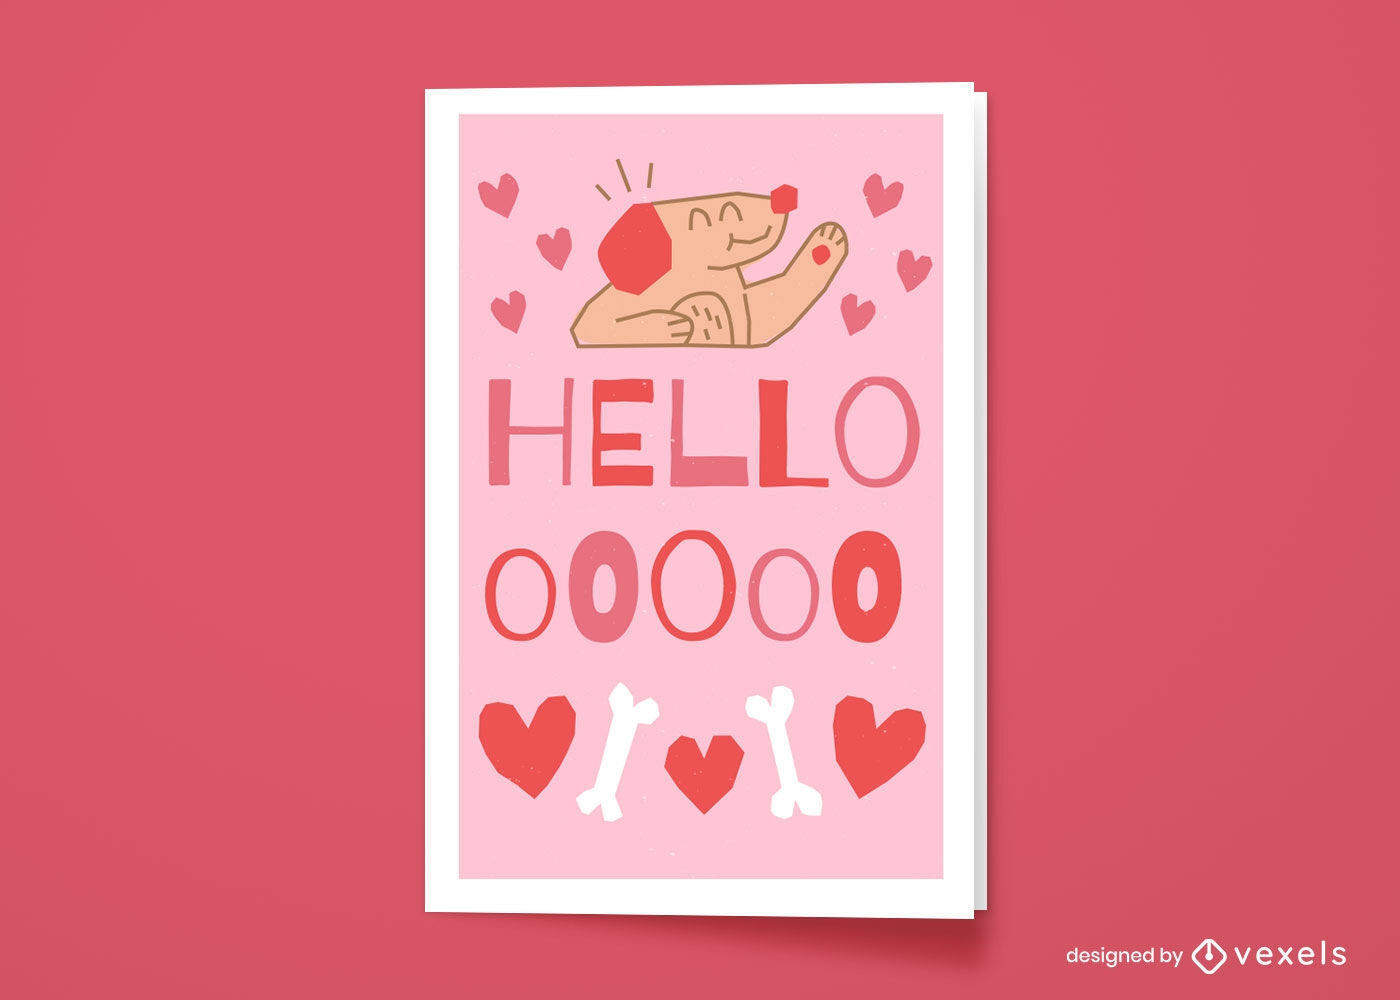 Puppy saying hello greeting card design